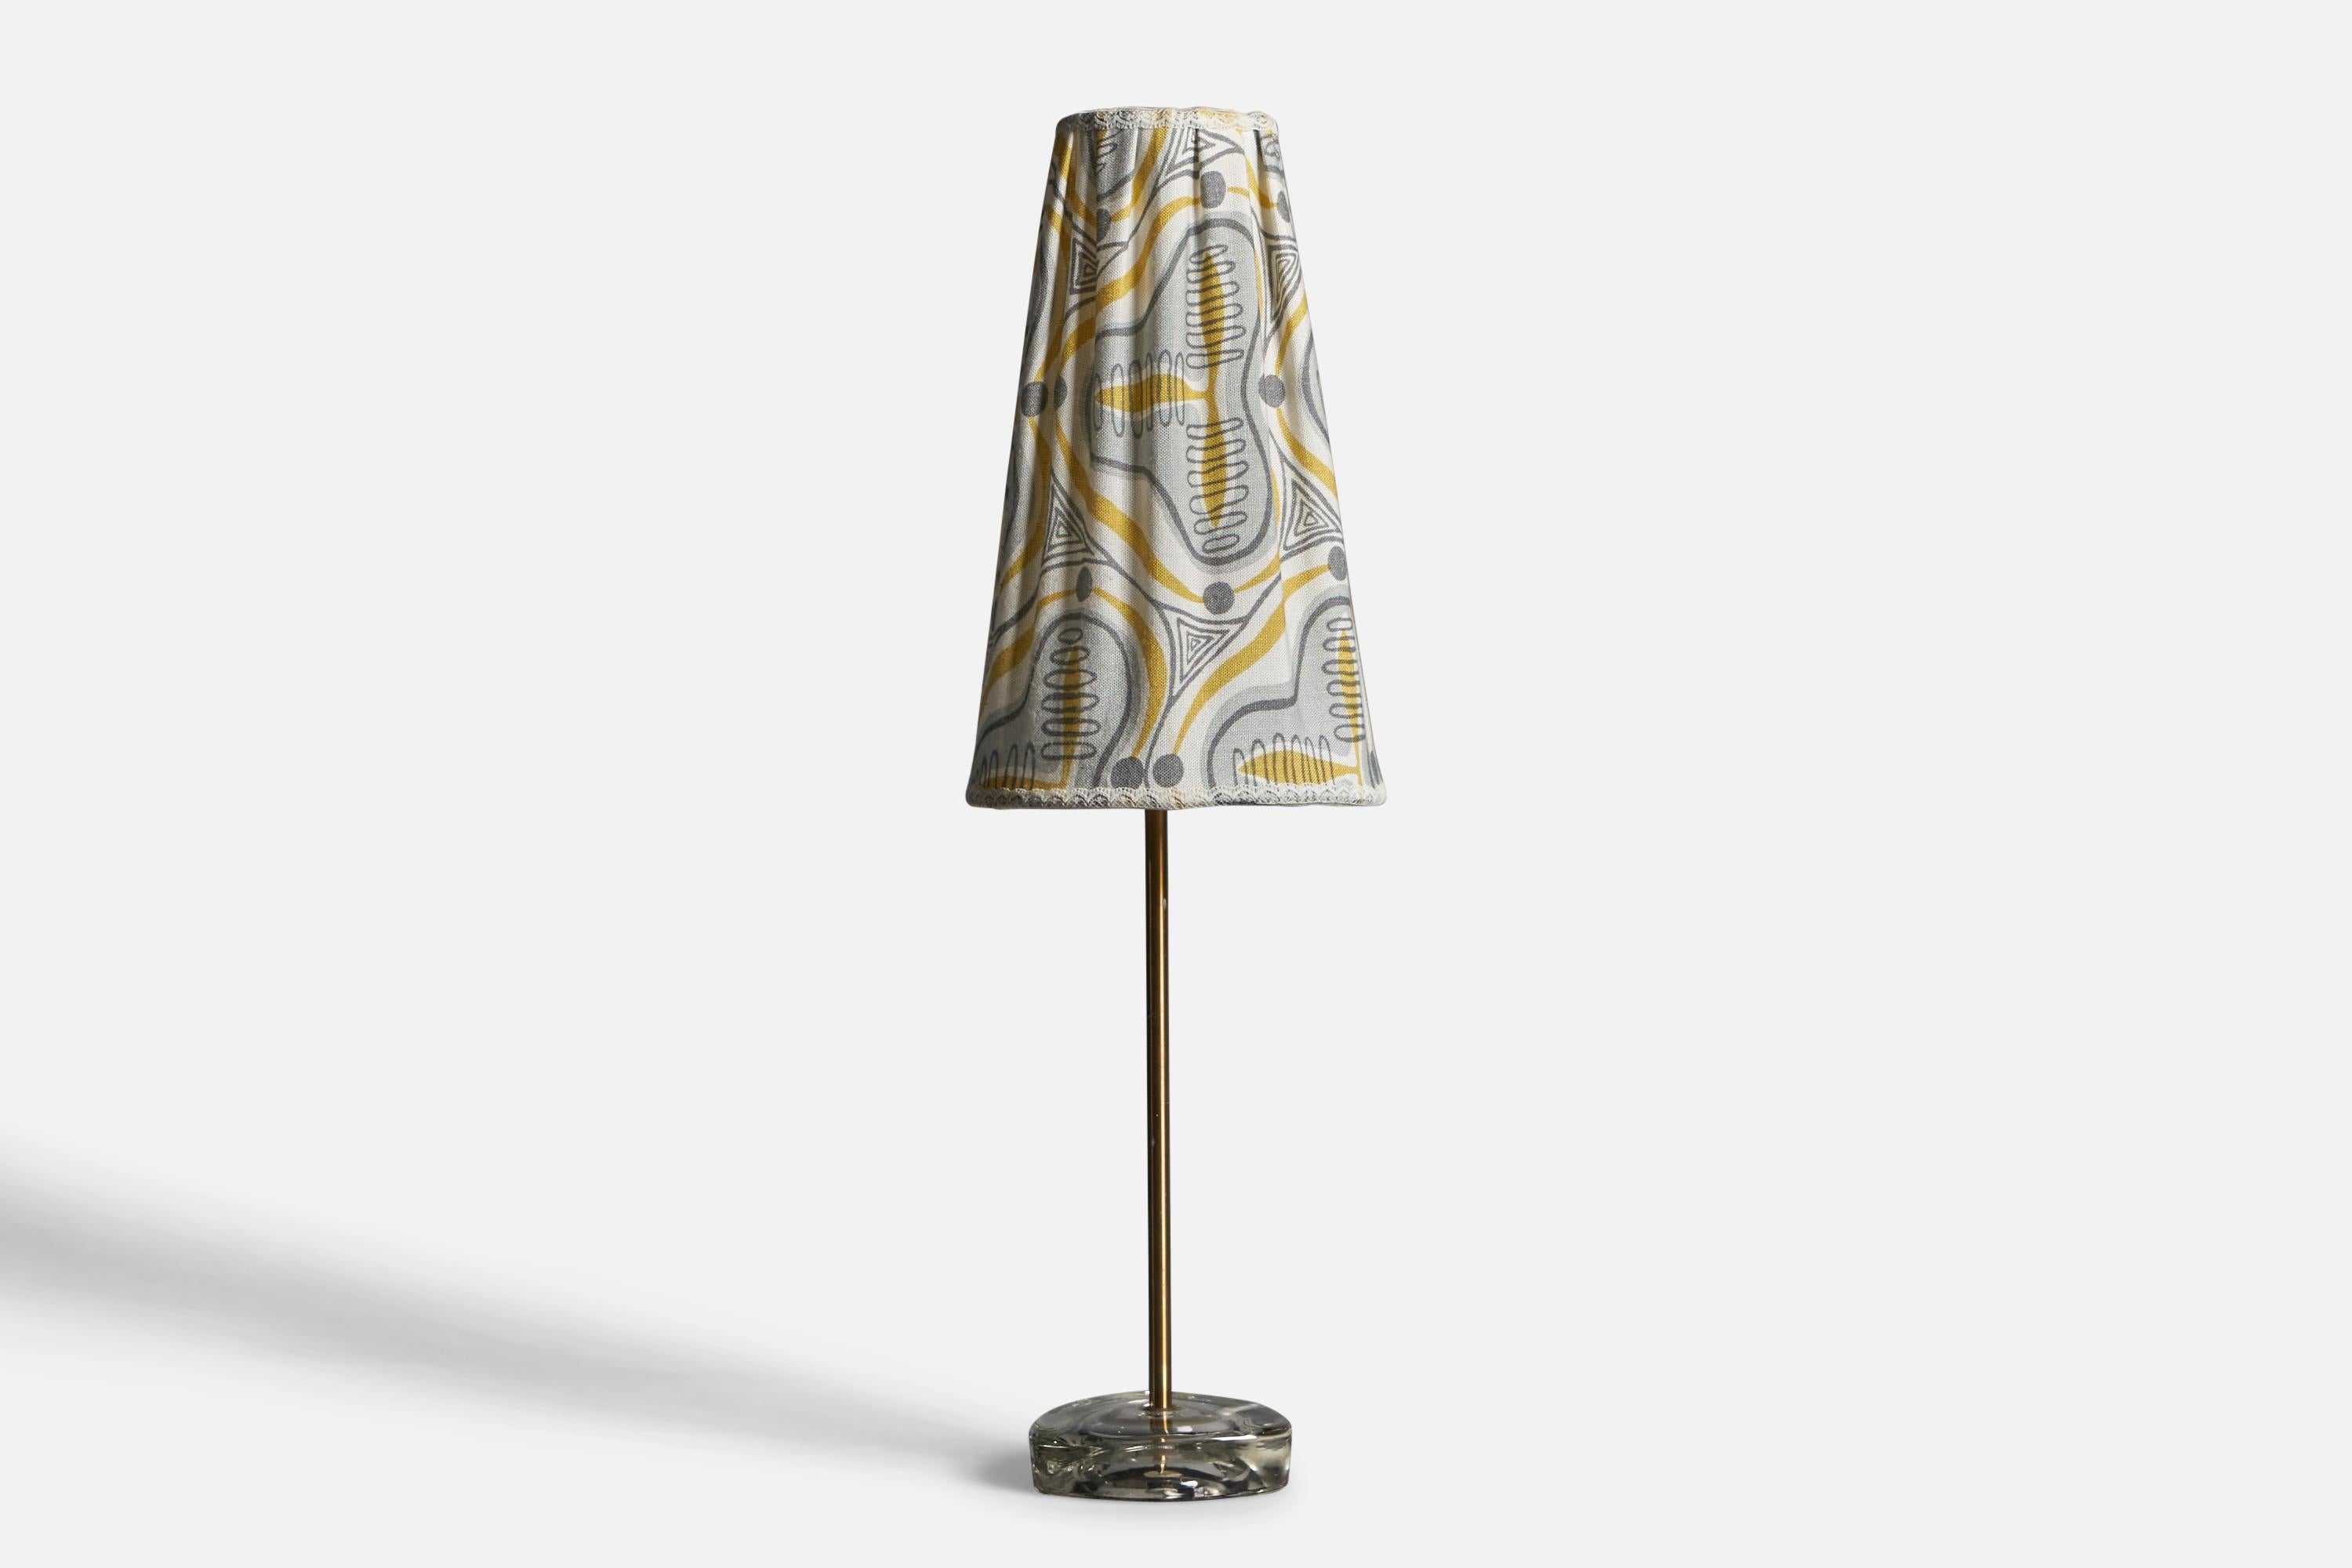 A brass, glass and printed fabric table lamp, designed and produced in Sweden, 1950s.
Overall Dimensions (inches): 22